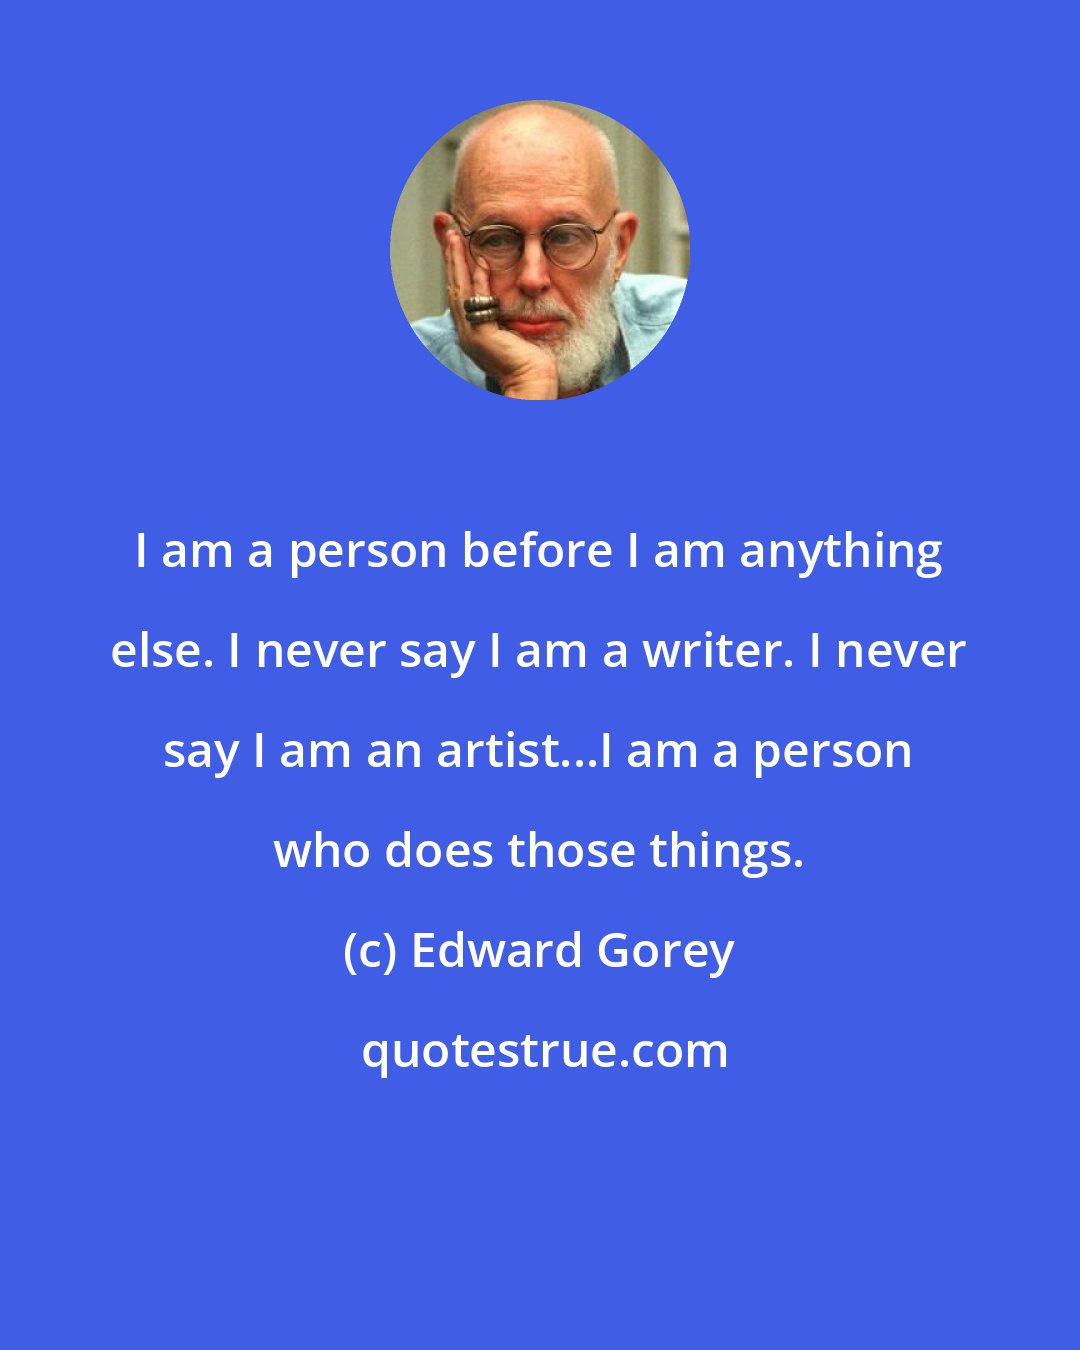 Edward Gorey: I am a person before I am anything else. I never say I am a writer. I never say I am an artist...I am a person who does those things.